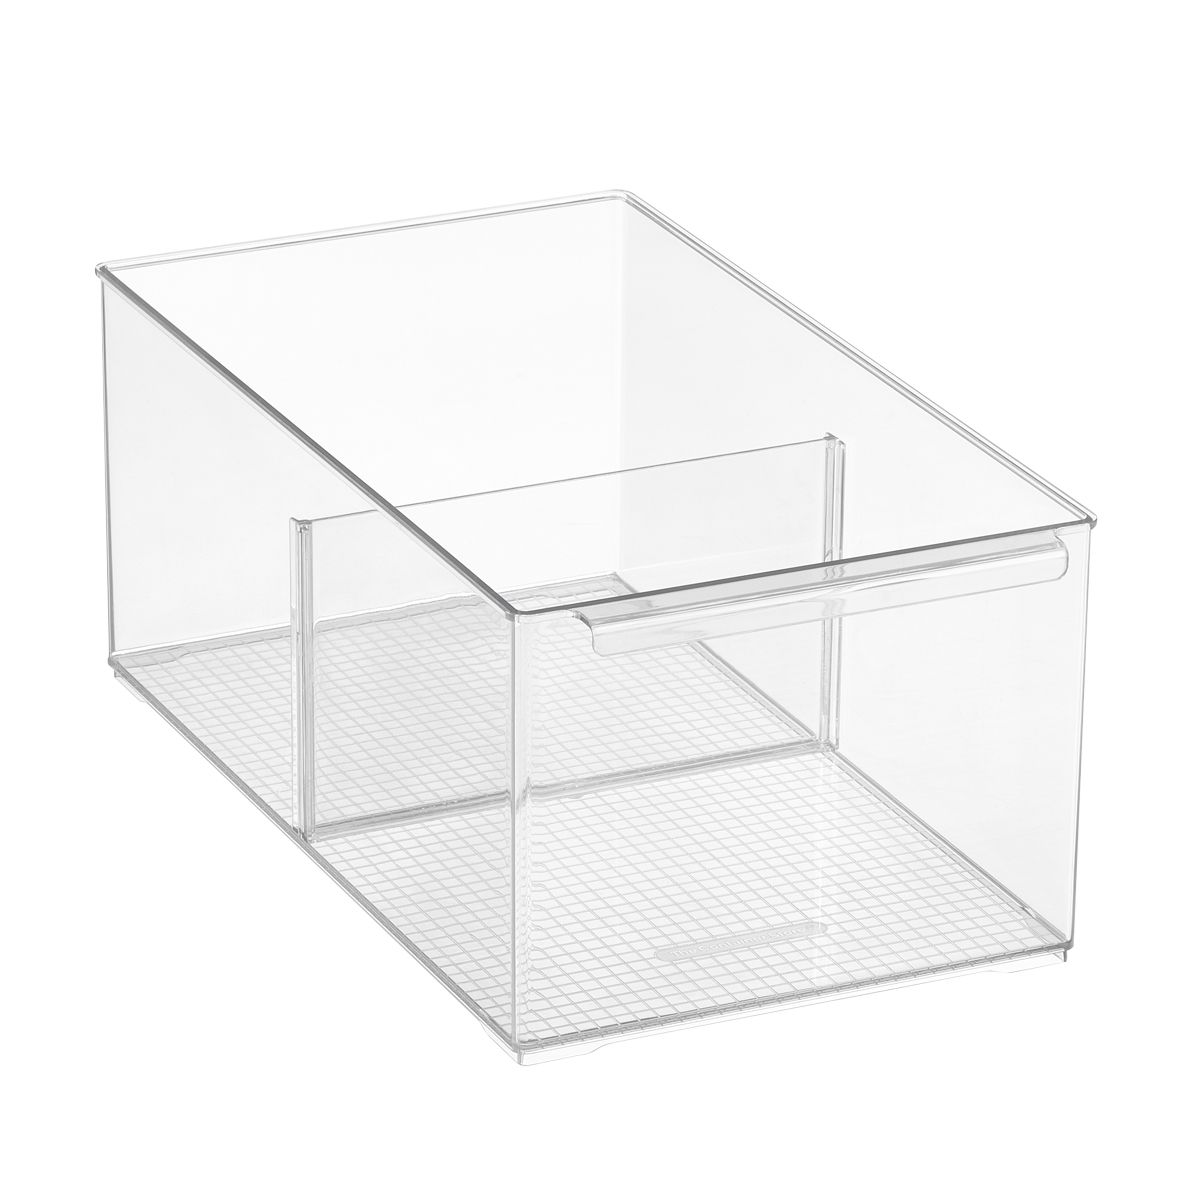 Everything Organizer Large Shelf Depth Pantry Bin w/ Divider | The Container Store